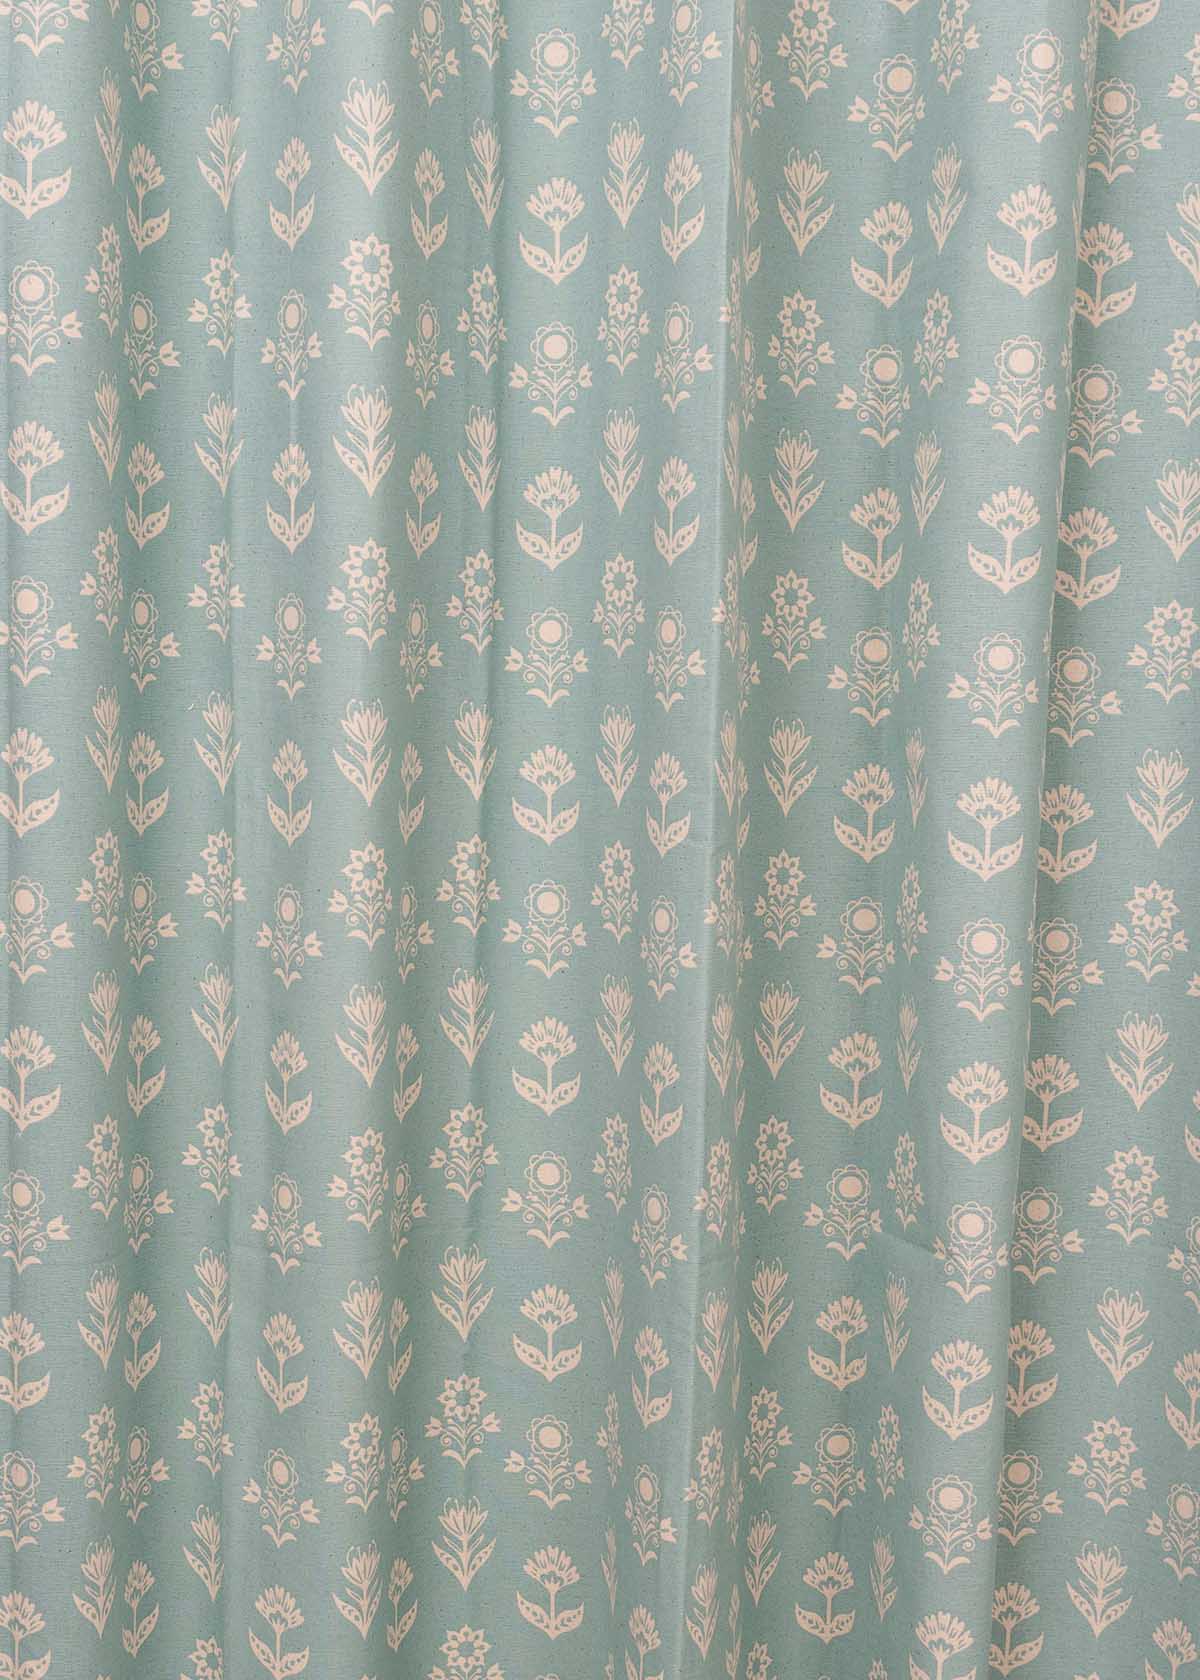 Dahlia 100% cotton floral curtain for living room - Room darkening - Nile Blue - Pack of 1